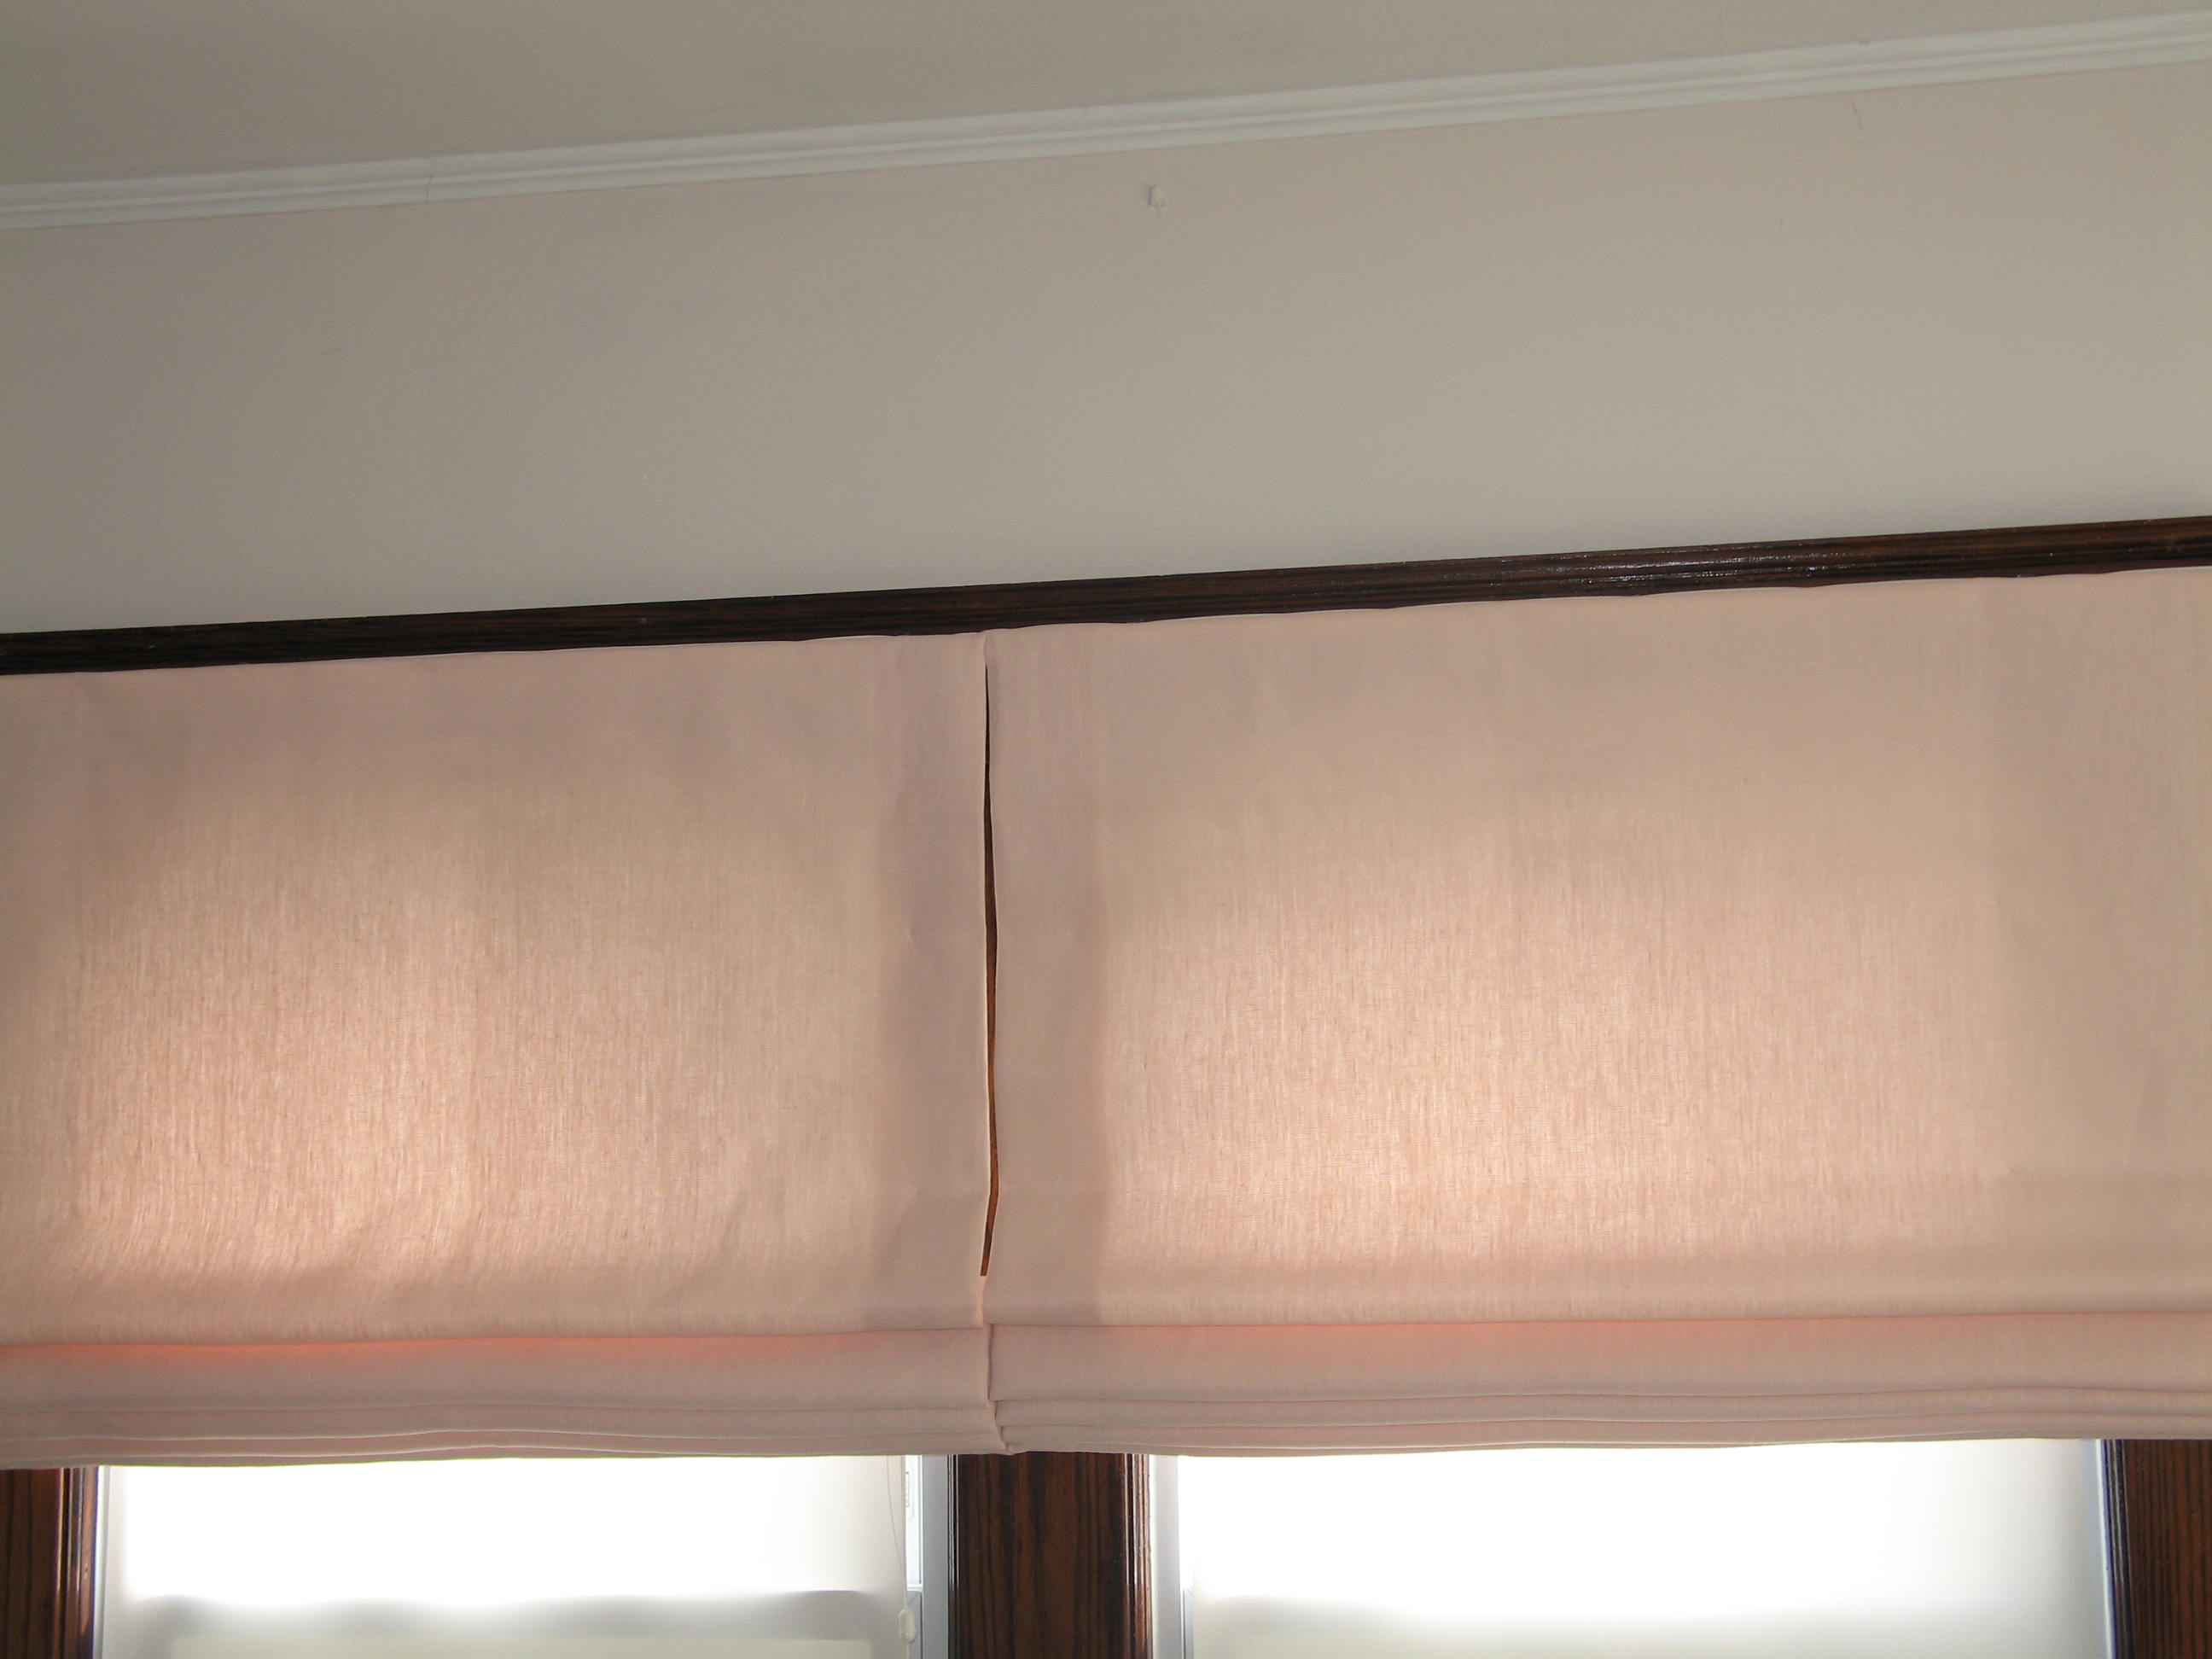 Grace, Pair of Flat Roman Shades in multipurpose pink, crafted in my studio in Peekskill, NY.